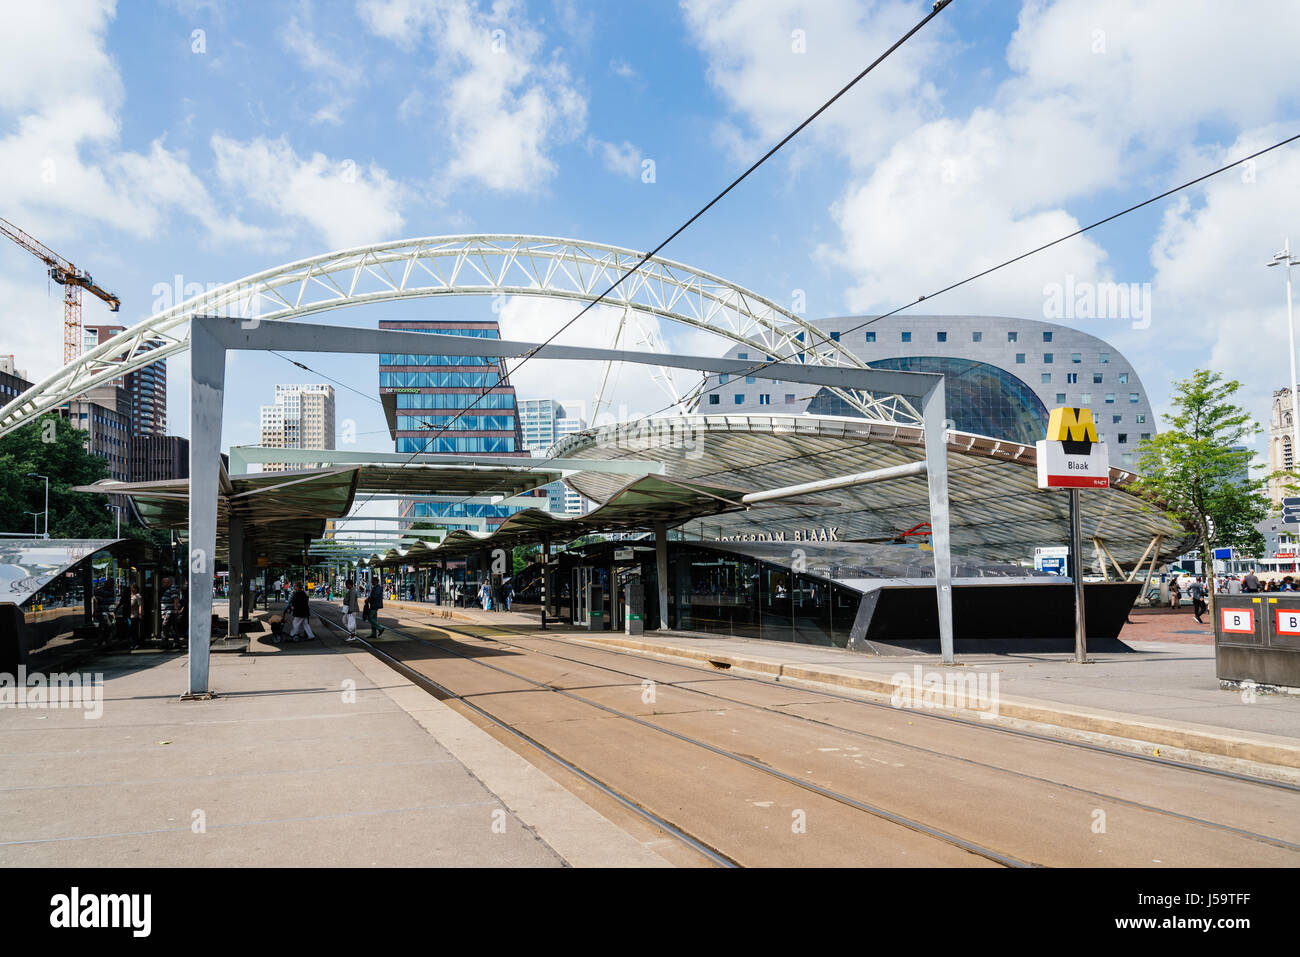 Rottedam, The Netherlands - August 6, 2016: Tramway station and cityscape in Rotterdam city centre Stock Photo